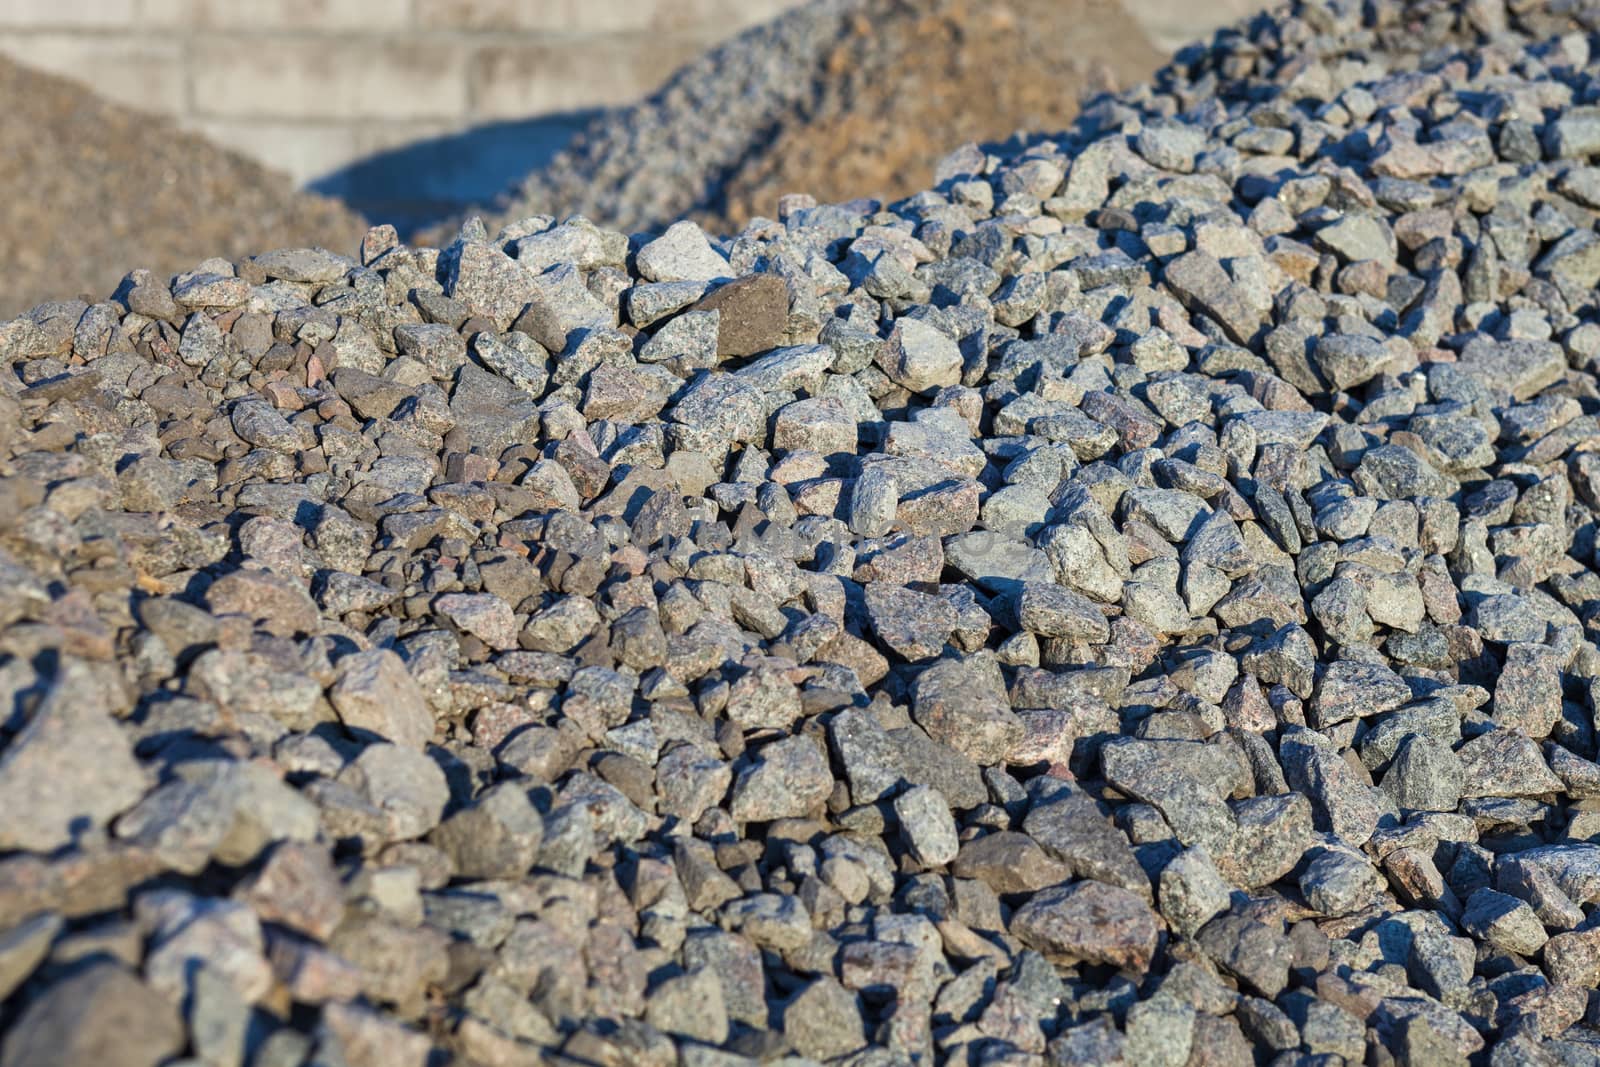 Piles of crushed stones by rootstocks